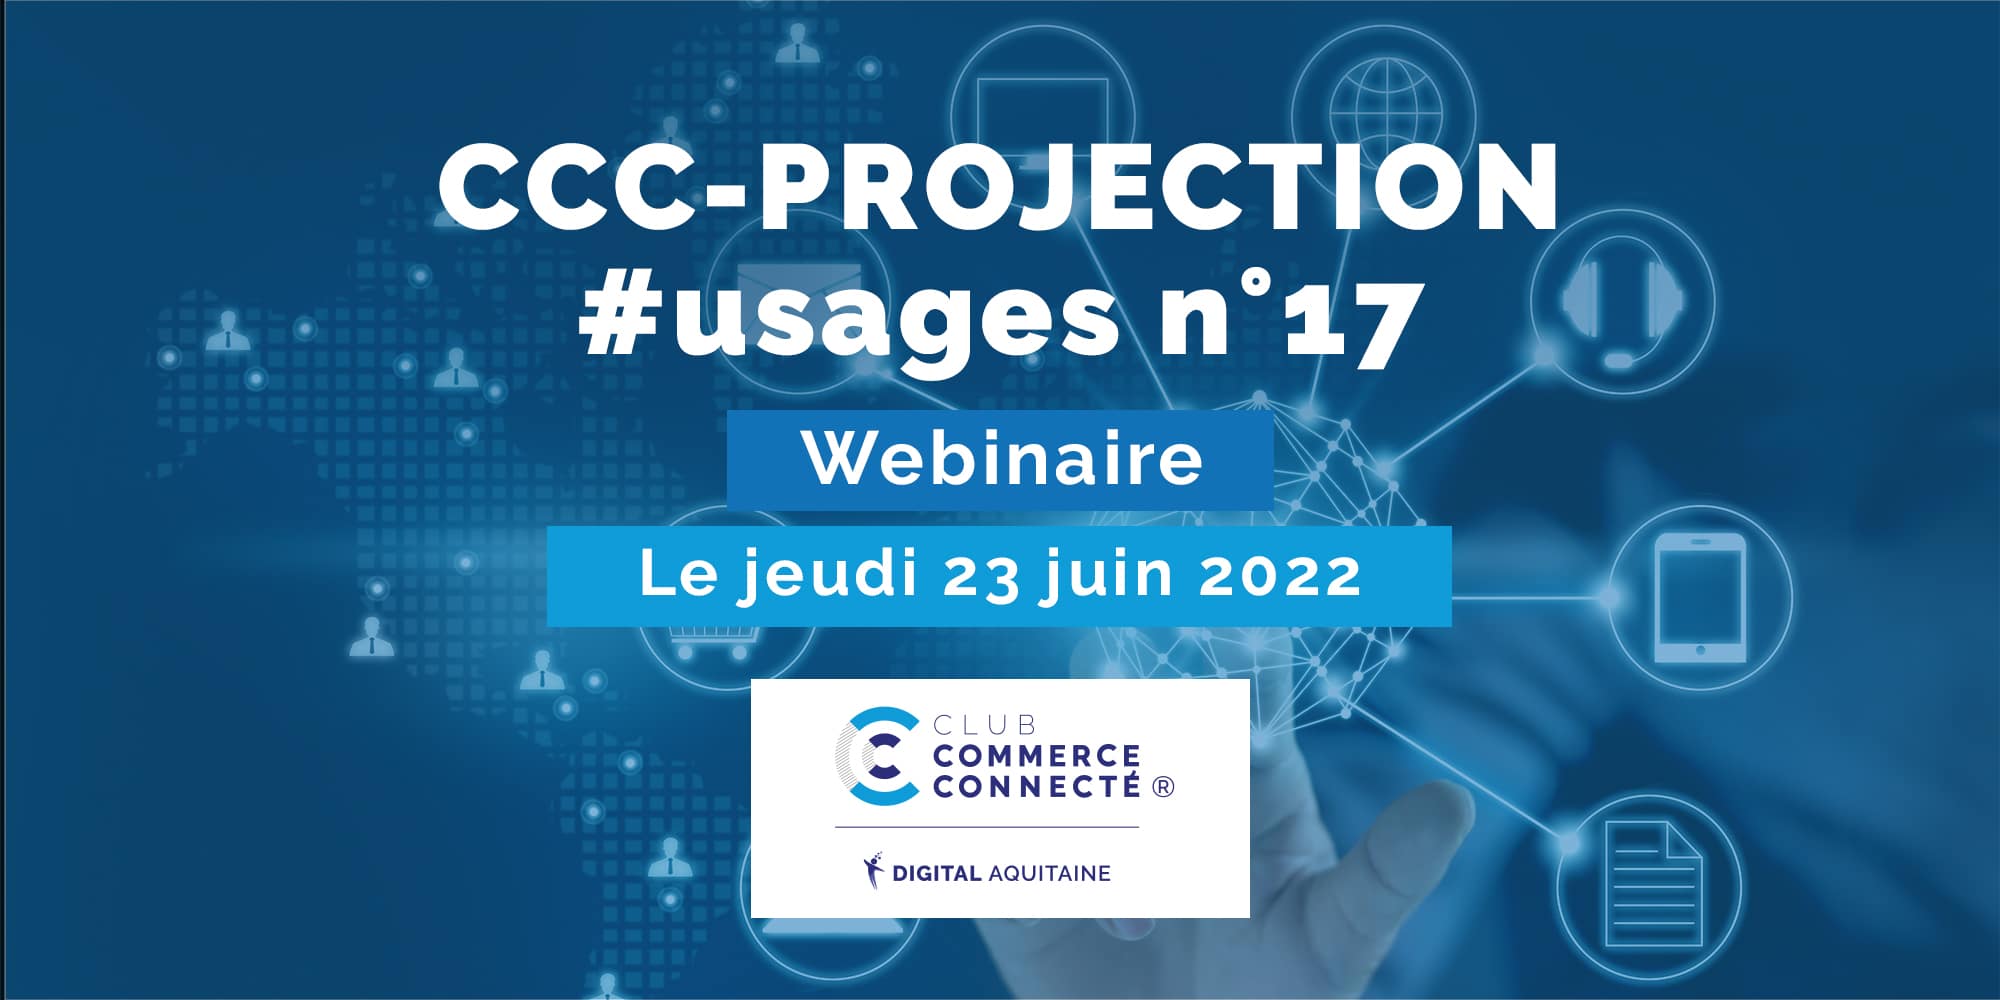 CCC-PROJECTION #usages n°17